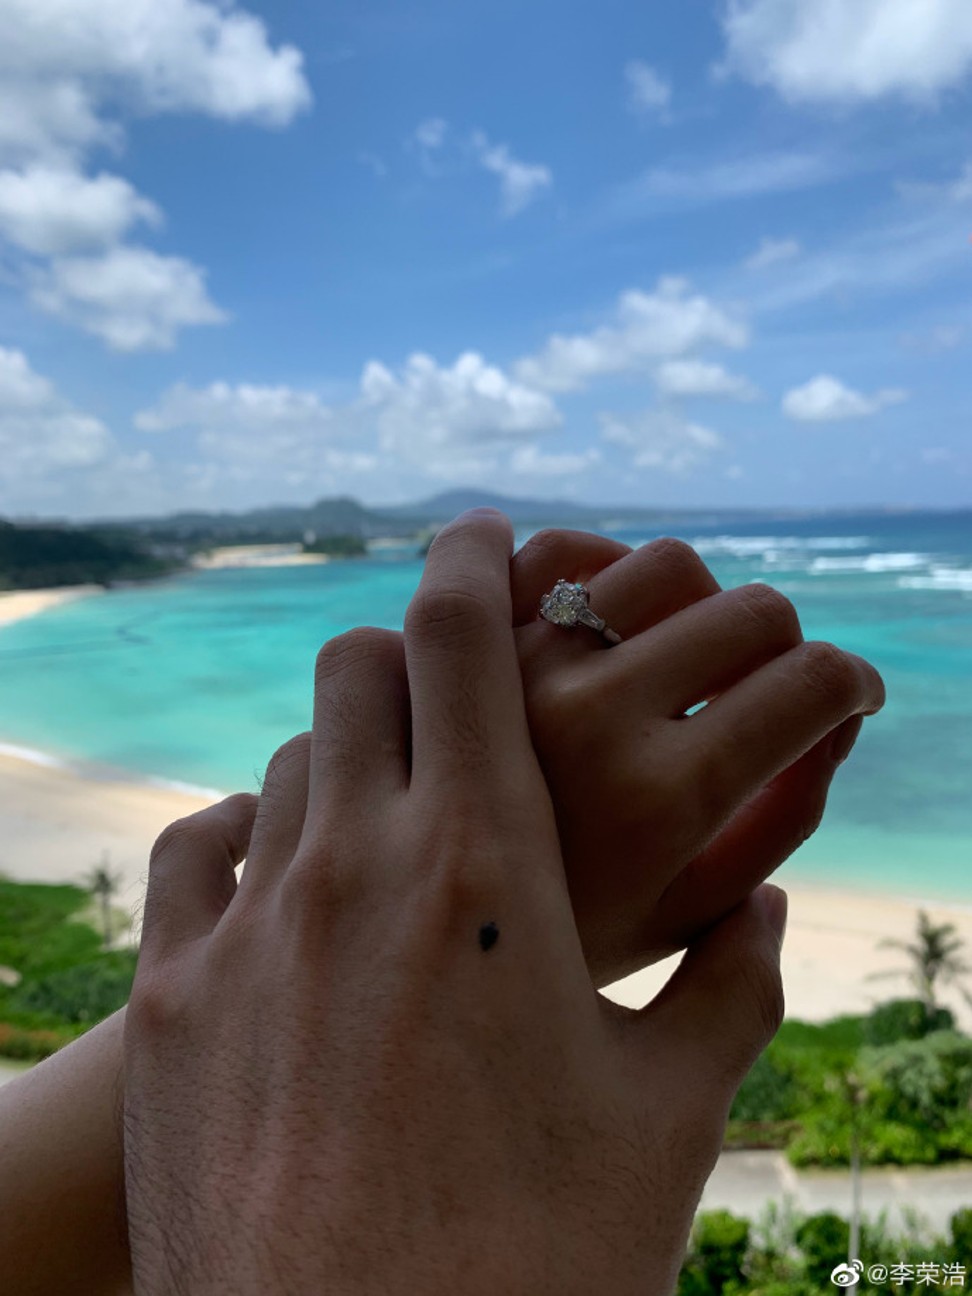 Chinese singer Li Ronghao’s photograph shows a diamond engagement ring on the finger of his fiancée, Taiwanese singer and actress Rainie Yang. Photo: Weibo @ Li Ronghao